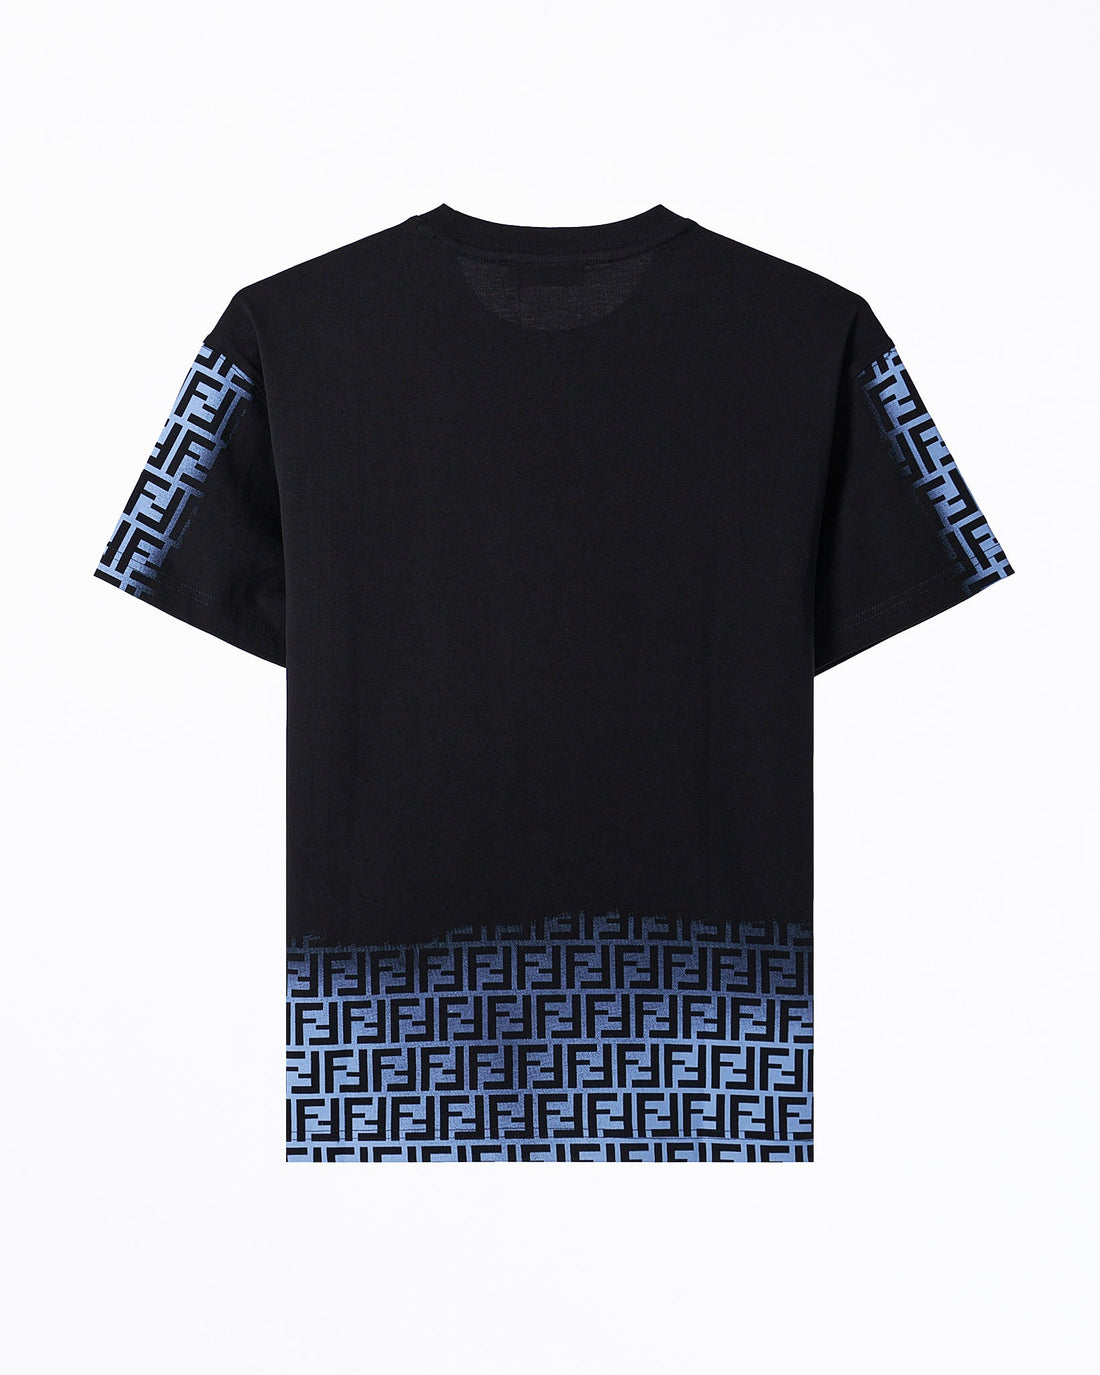 MOI OUTFIT-FF Monogram Sleeve Printed Men T-Shirt 49.90